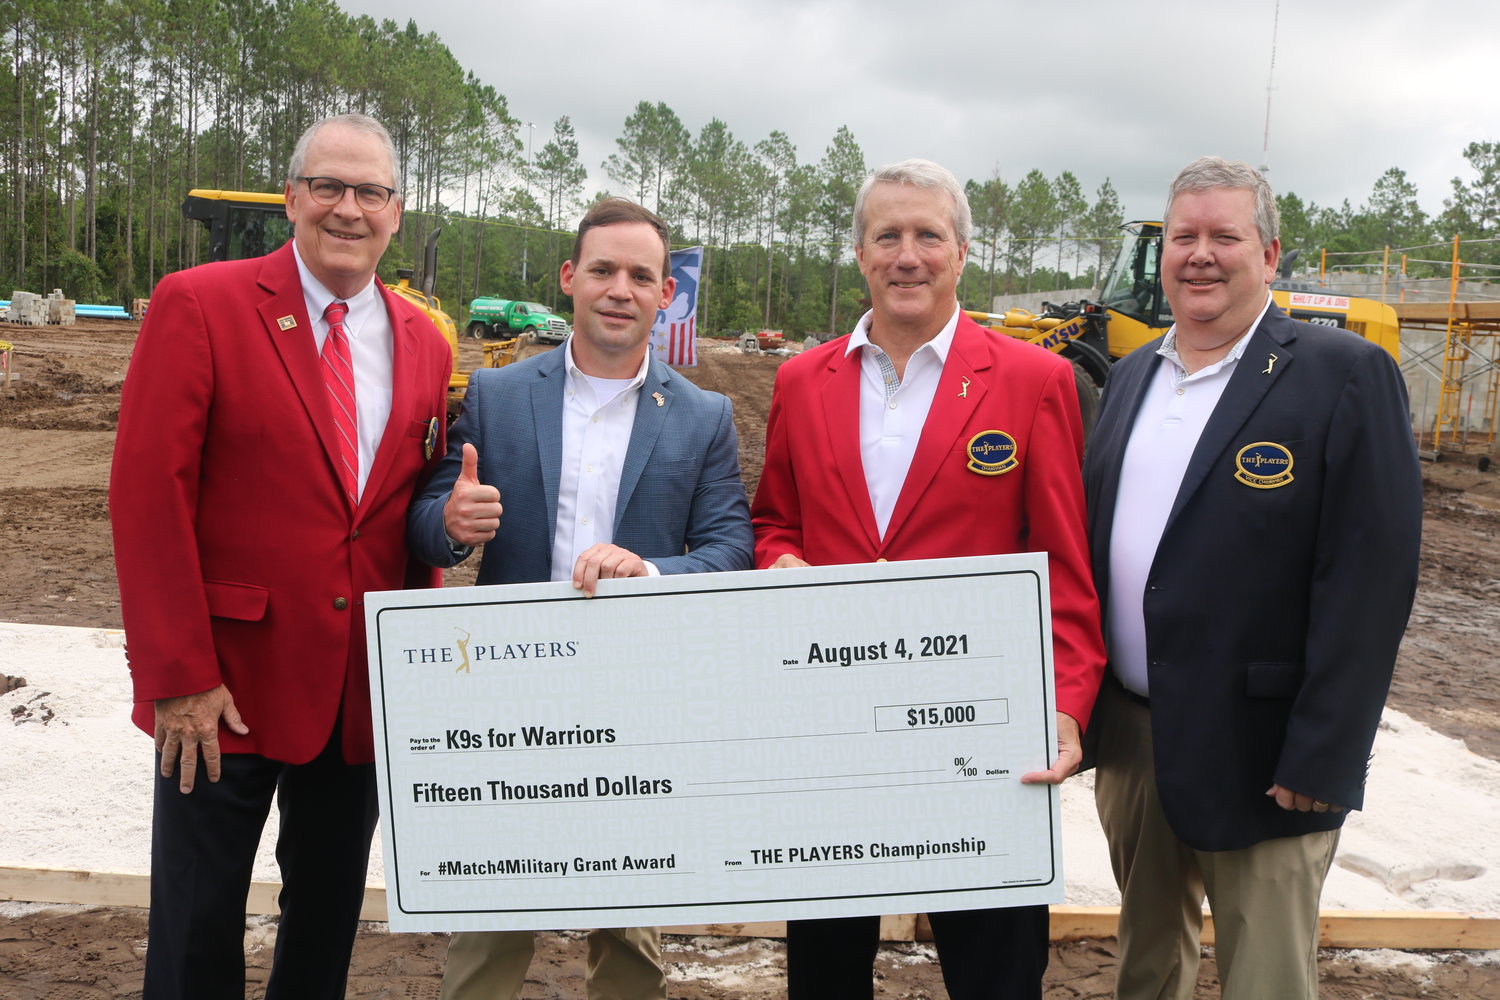 THE PLAYERS past chairman Murray Beard (far left), 2022 tournament chairman Matt Welch (second from right) and vice chairman Lee Nimnicht (far right) present a $15,000 check to K9s For Warriors CEO Rory Diamond as part of THE PLAYERS Match4Military grant program.